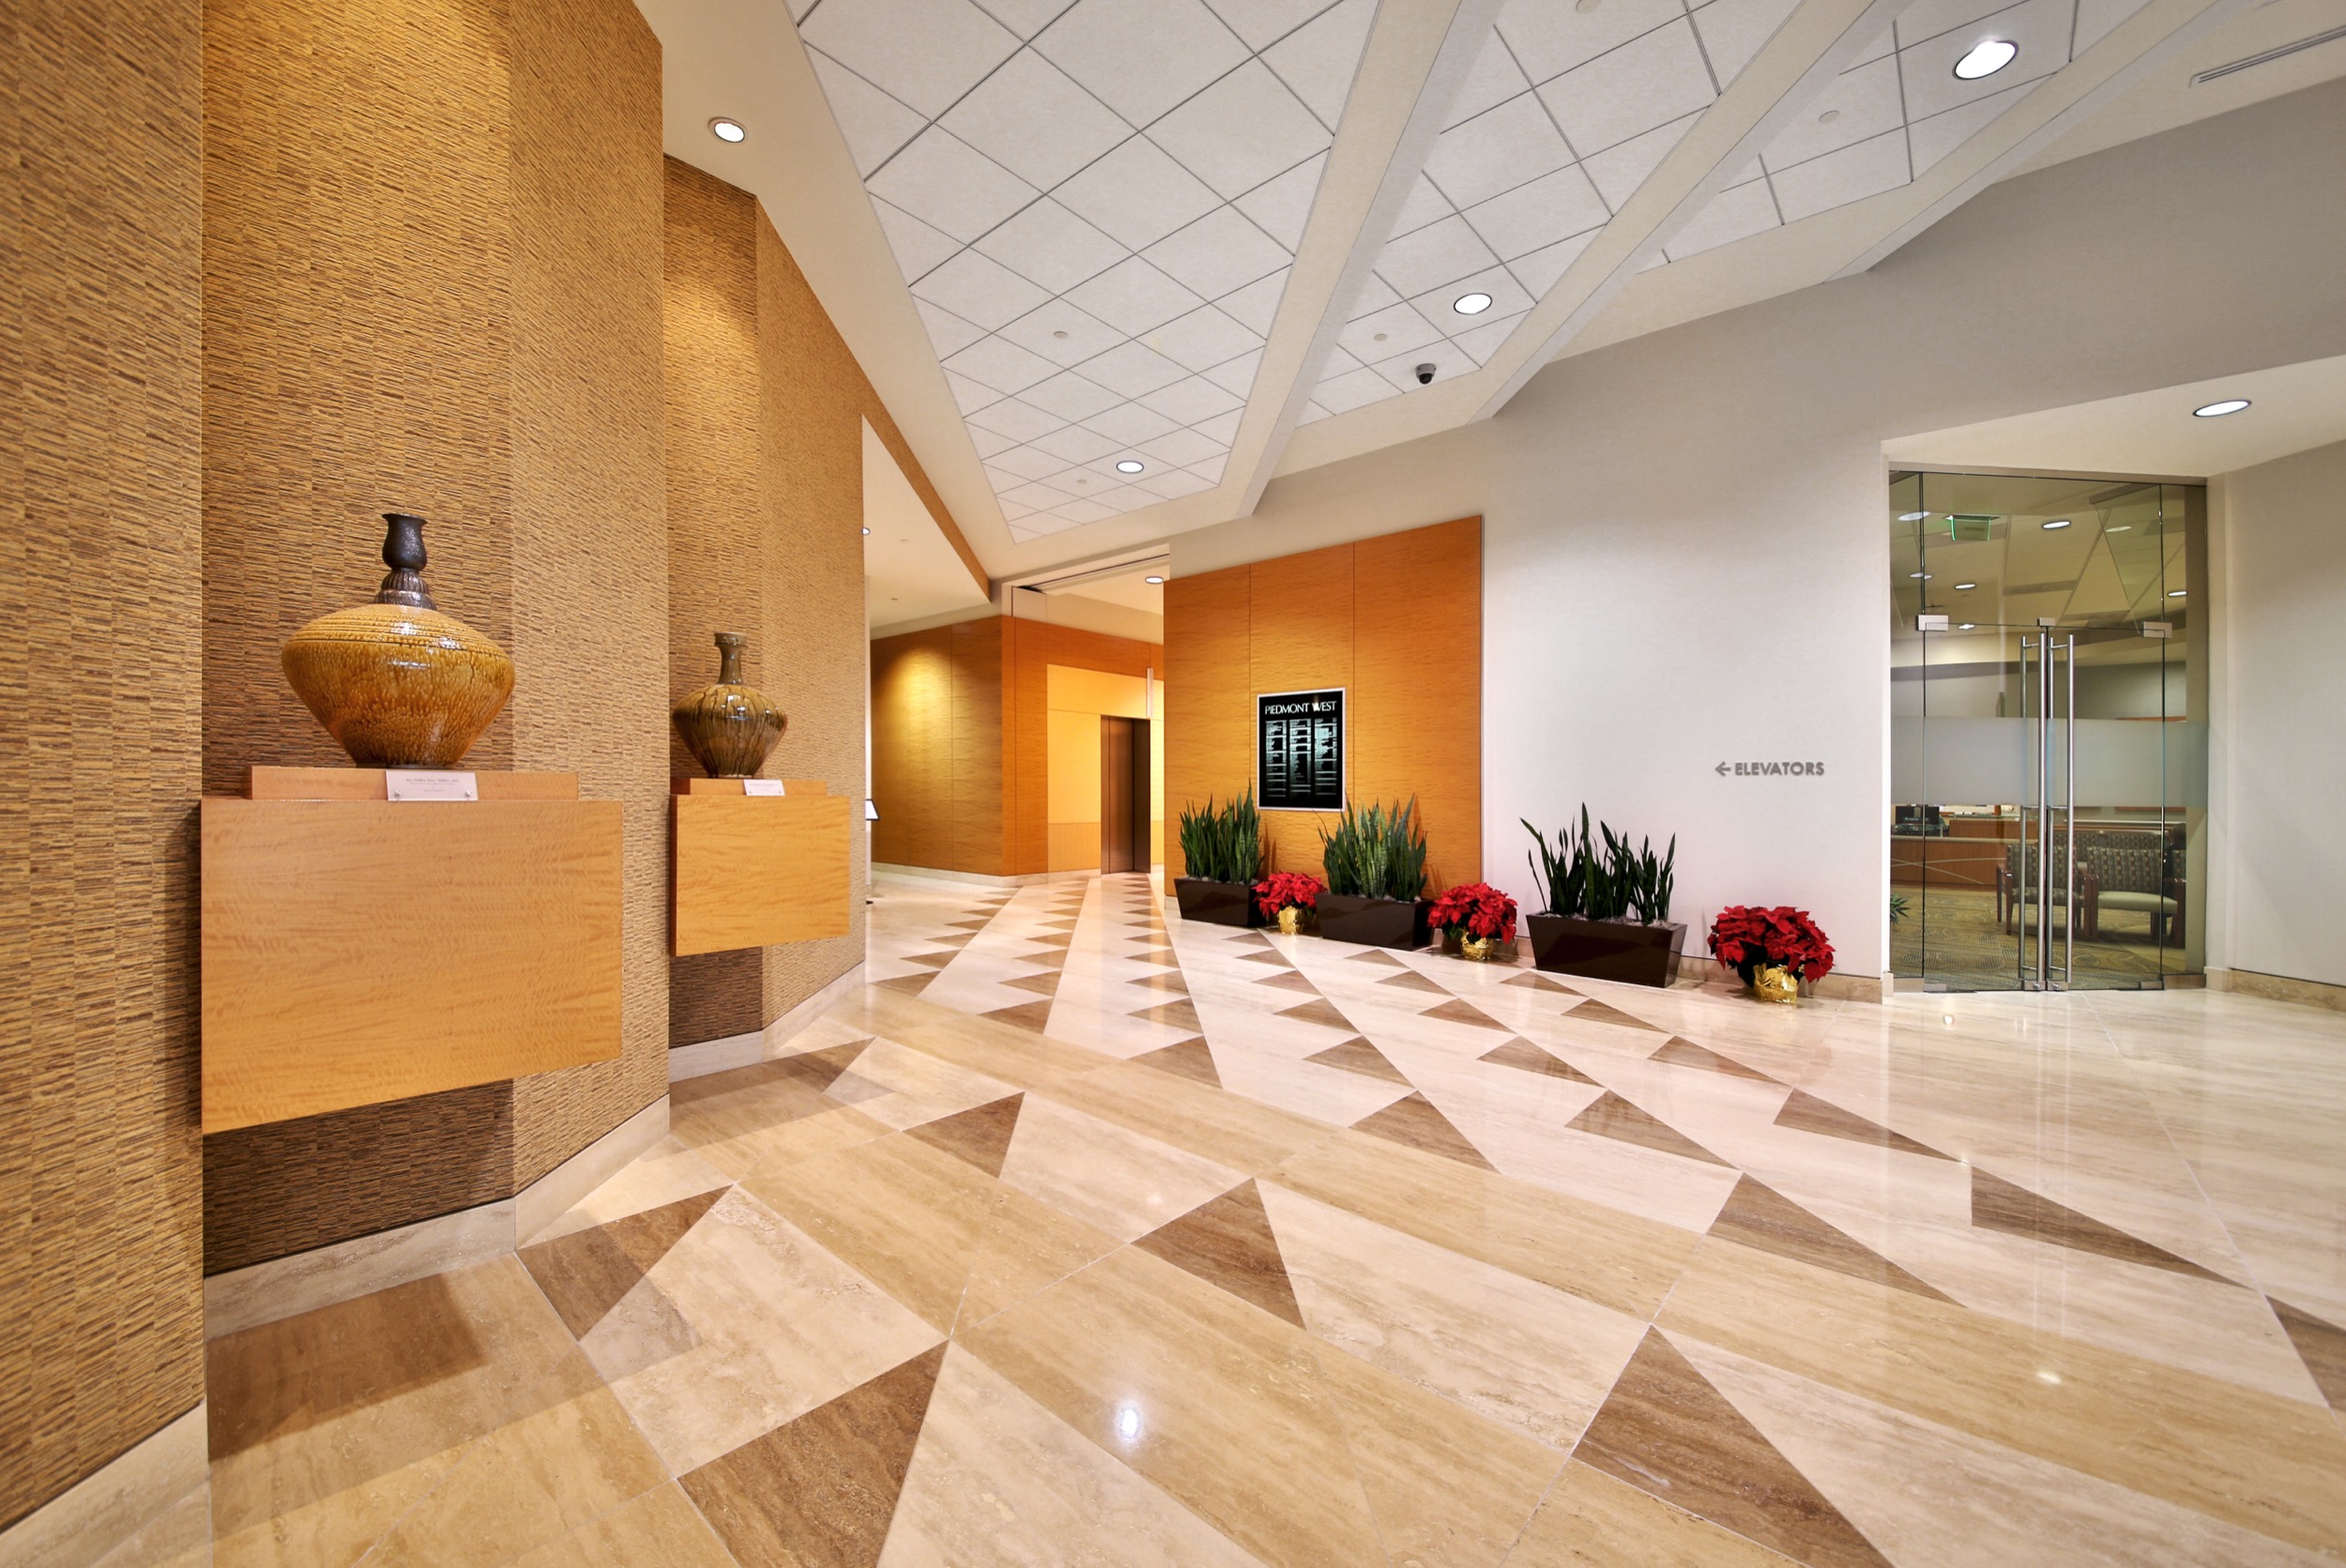 Piedmont West Medical Park Lobby - Remedy Medical Properties